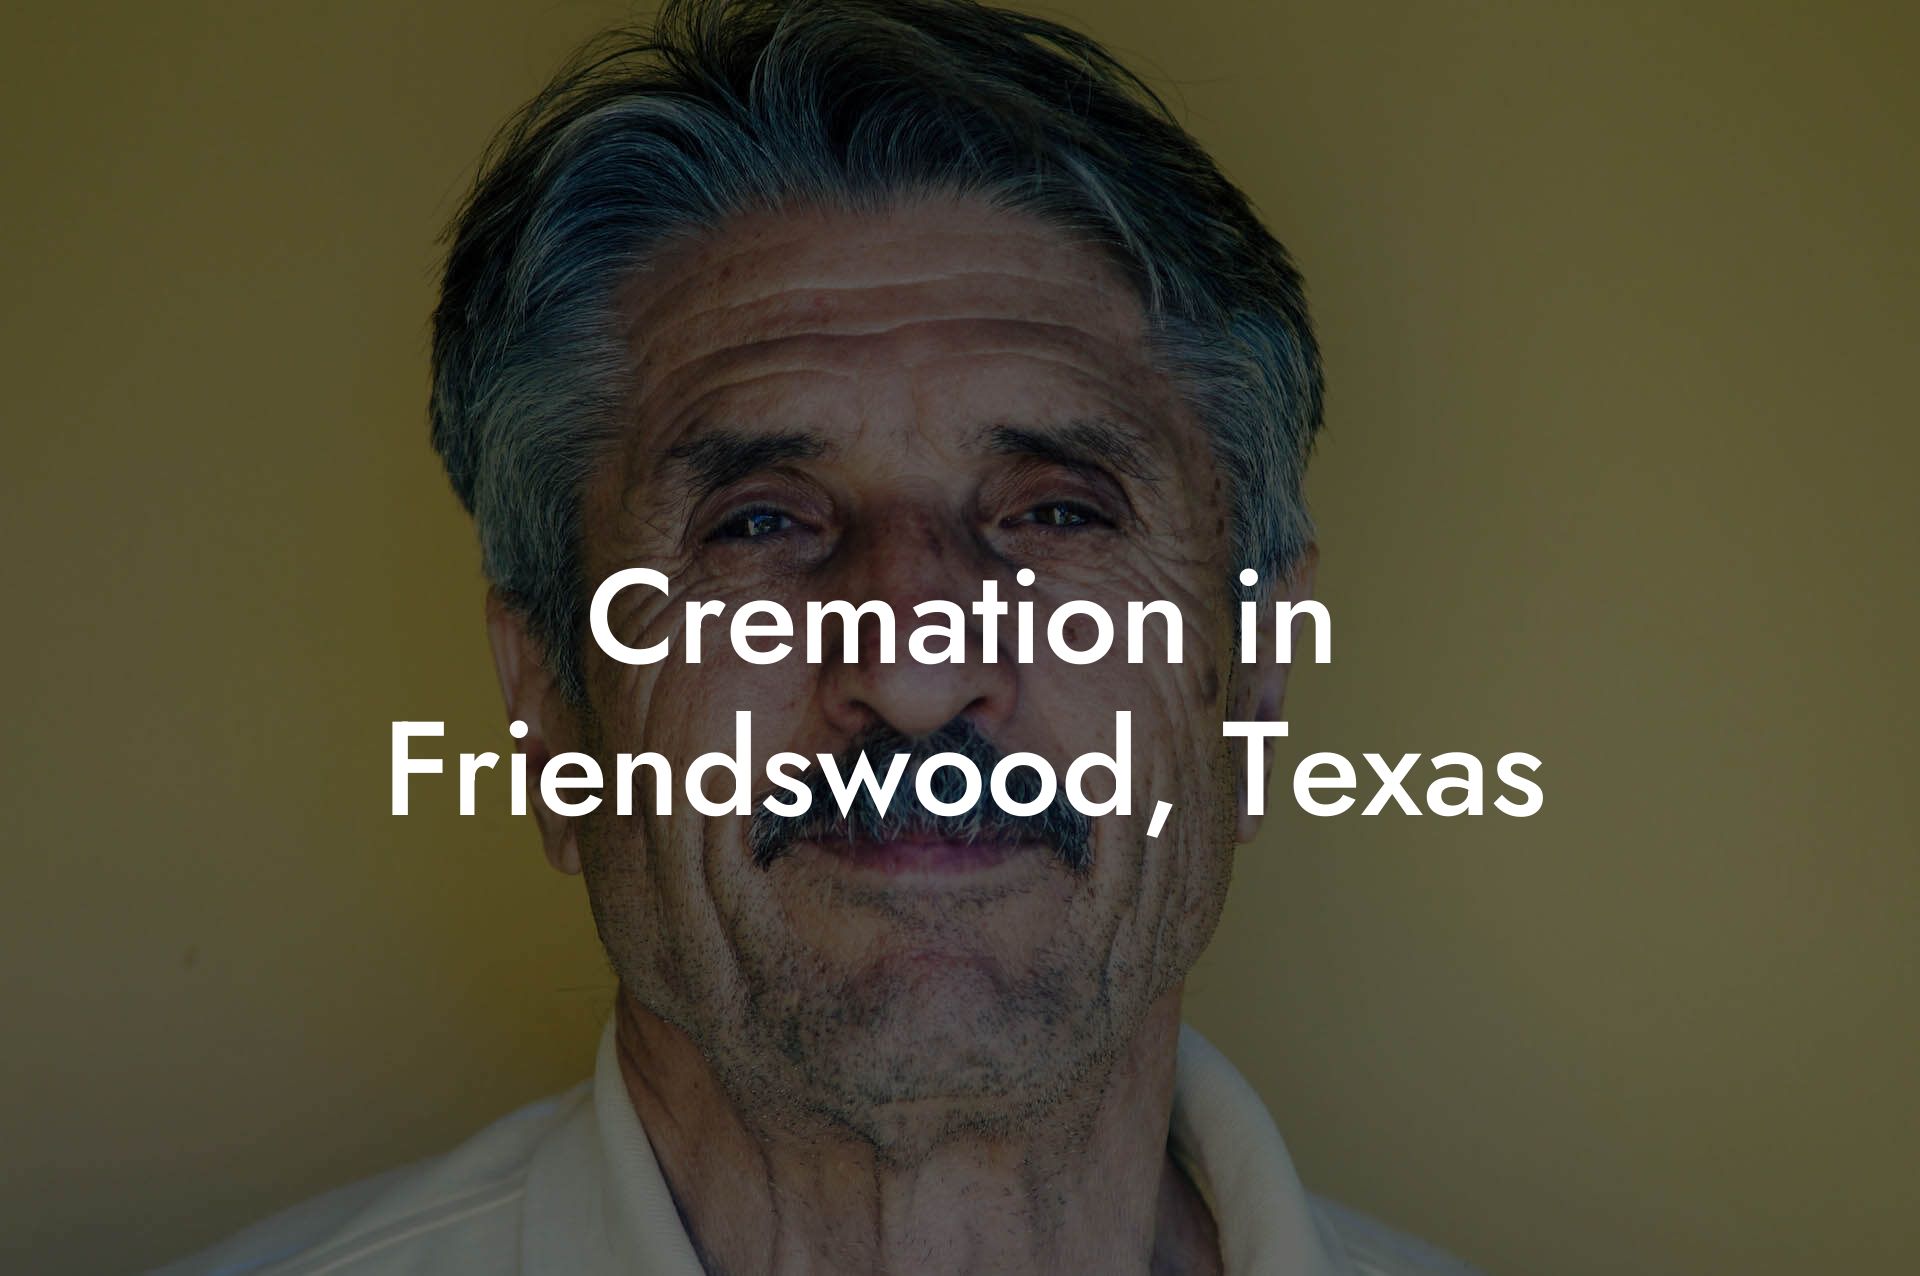 Cremation in Friendswood, Texas